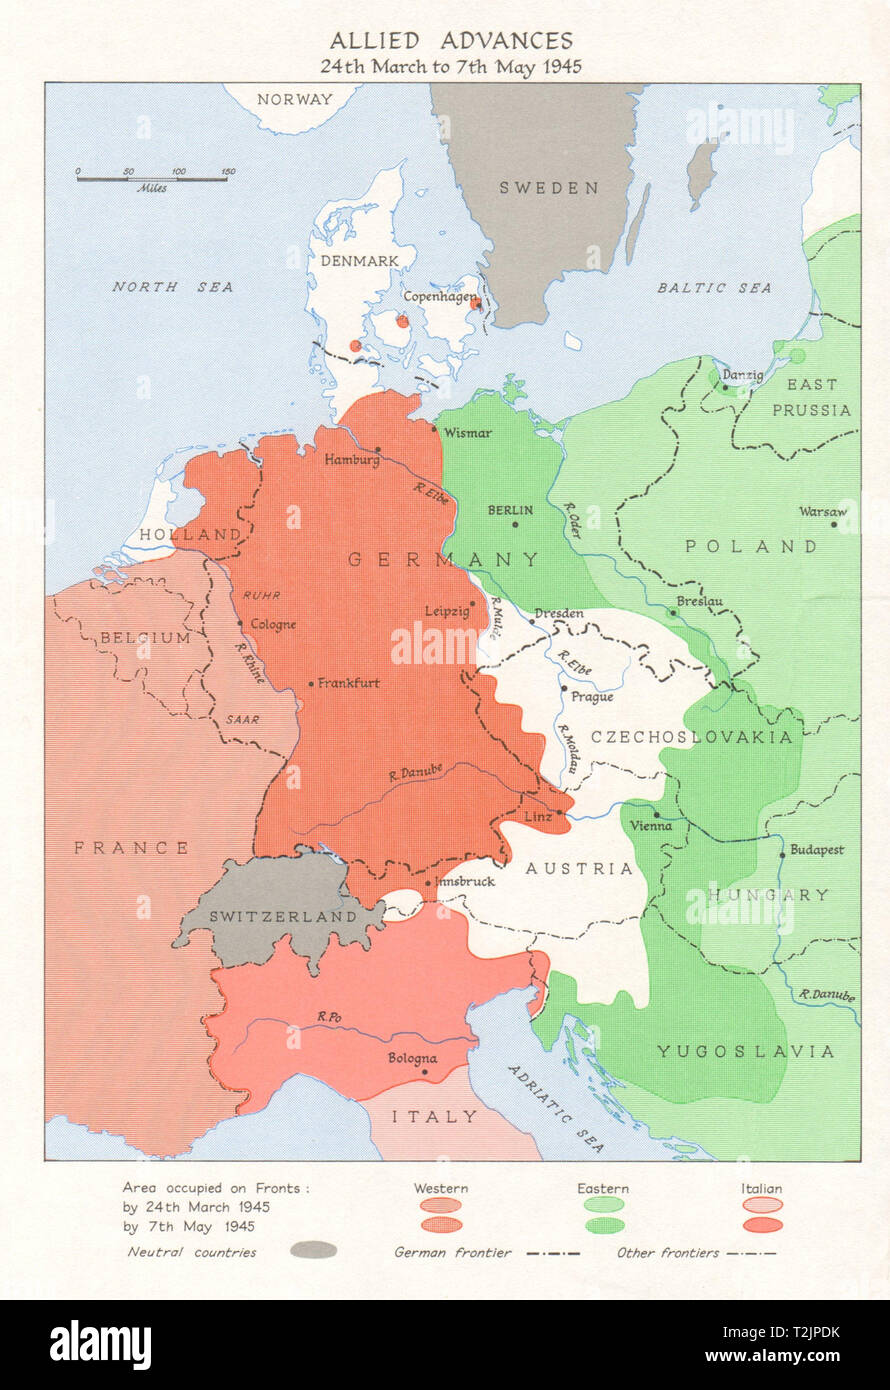 German surrender & end of World War 2. Allied Advances March-May 1945 1968 map Stock Photo